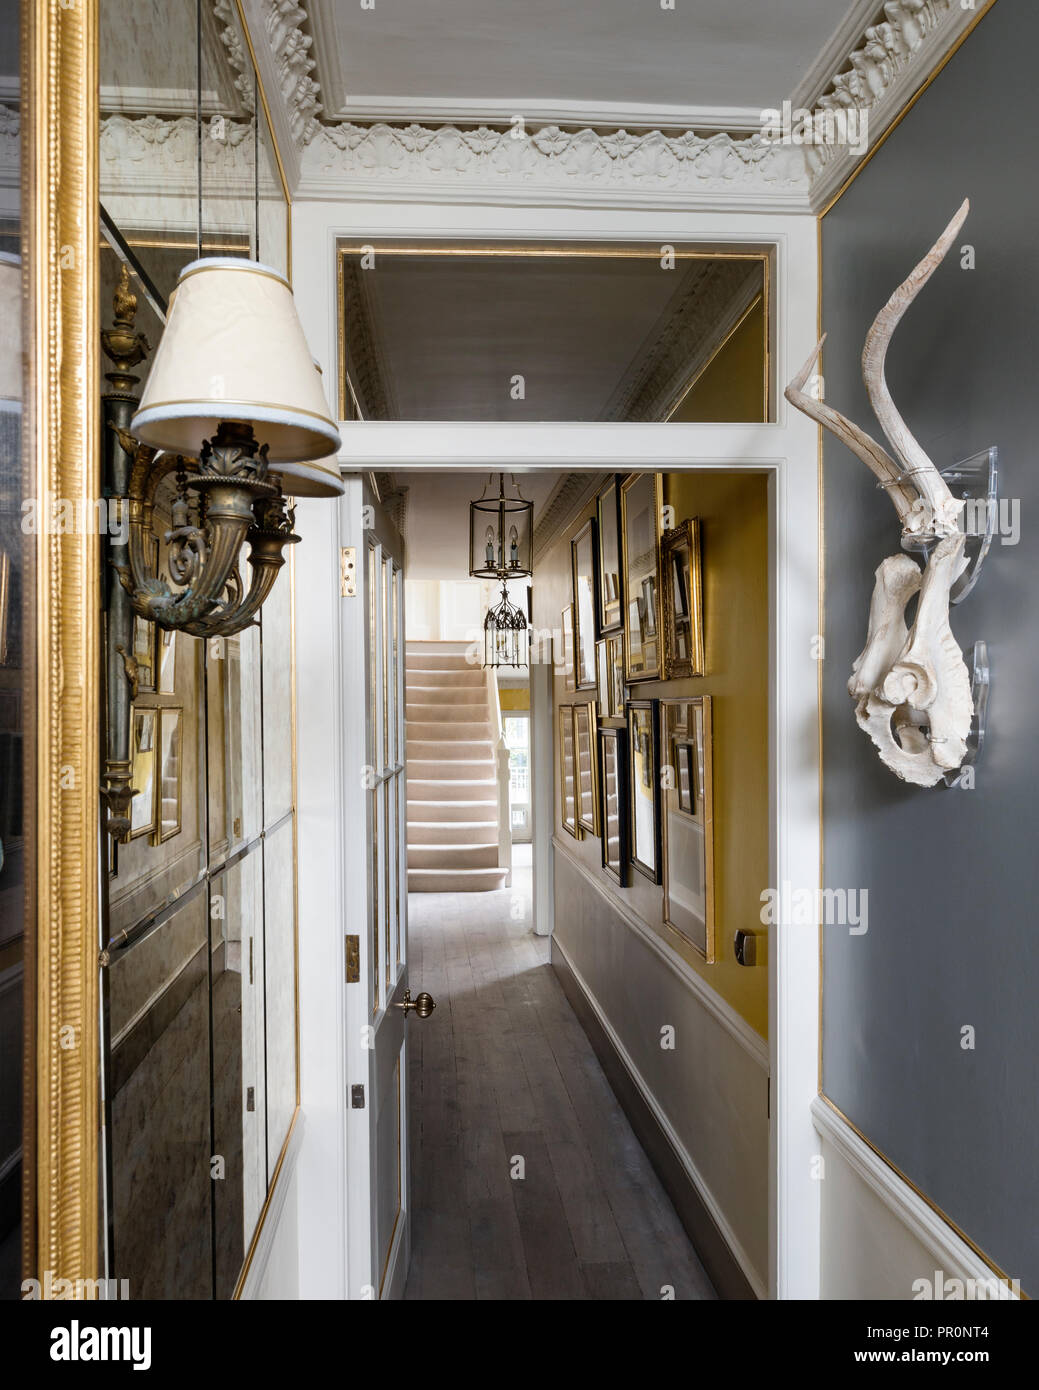 Wall mounted horns and gilt framed artwork in hallway Stock Photo